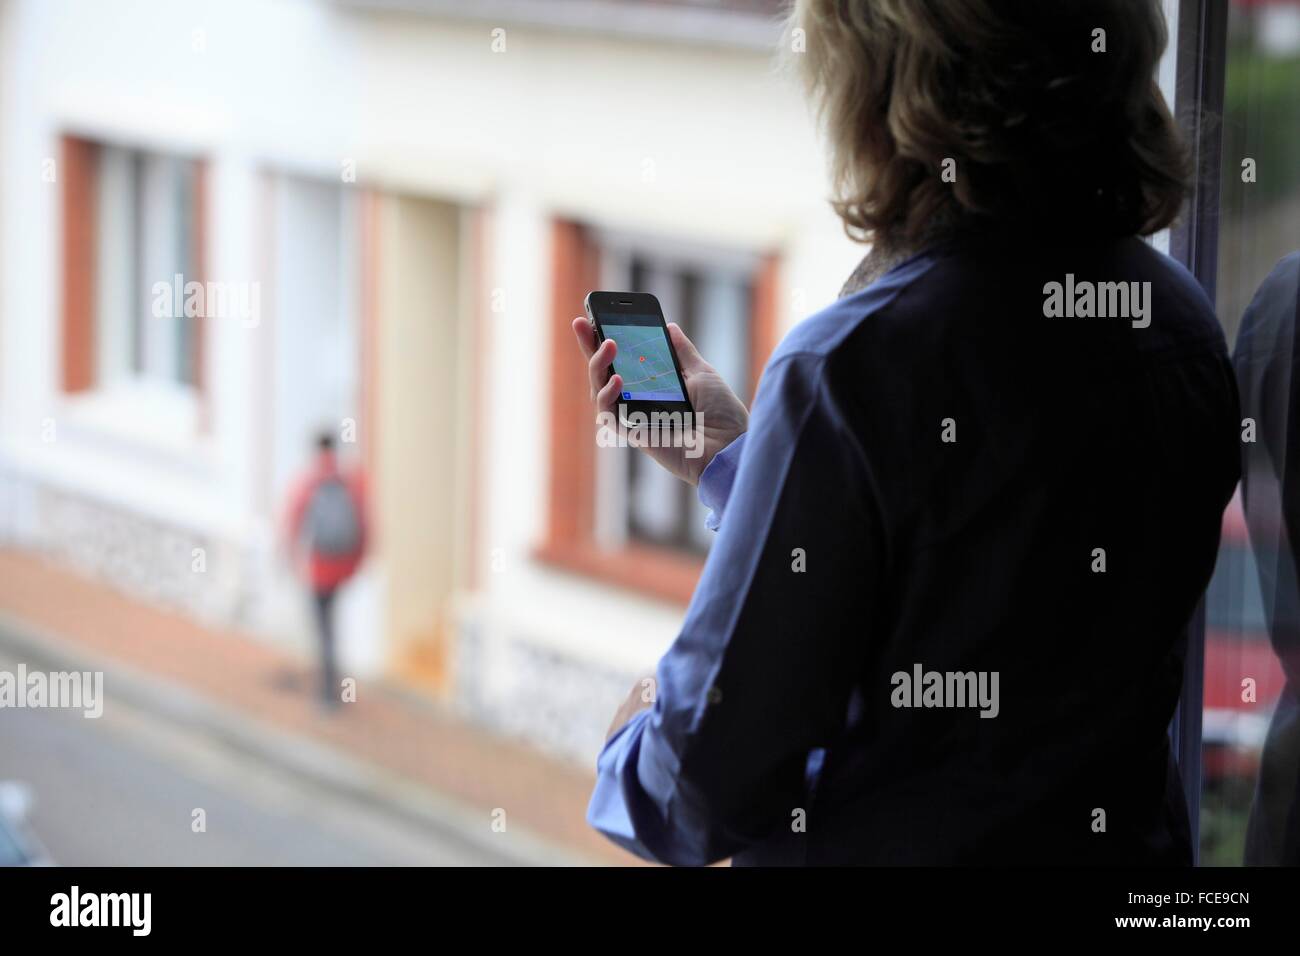 France, mother supervising her son thanks to an application of cellphone localization Stock Photo